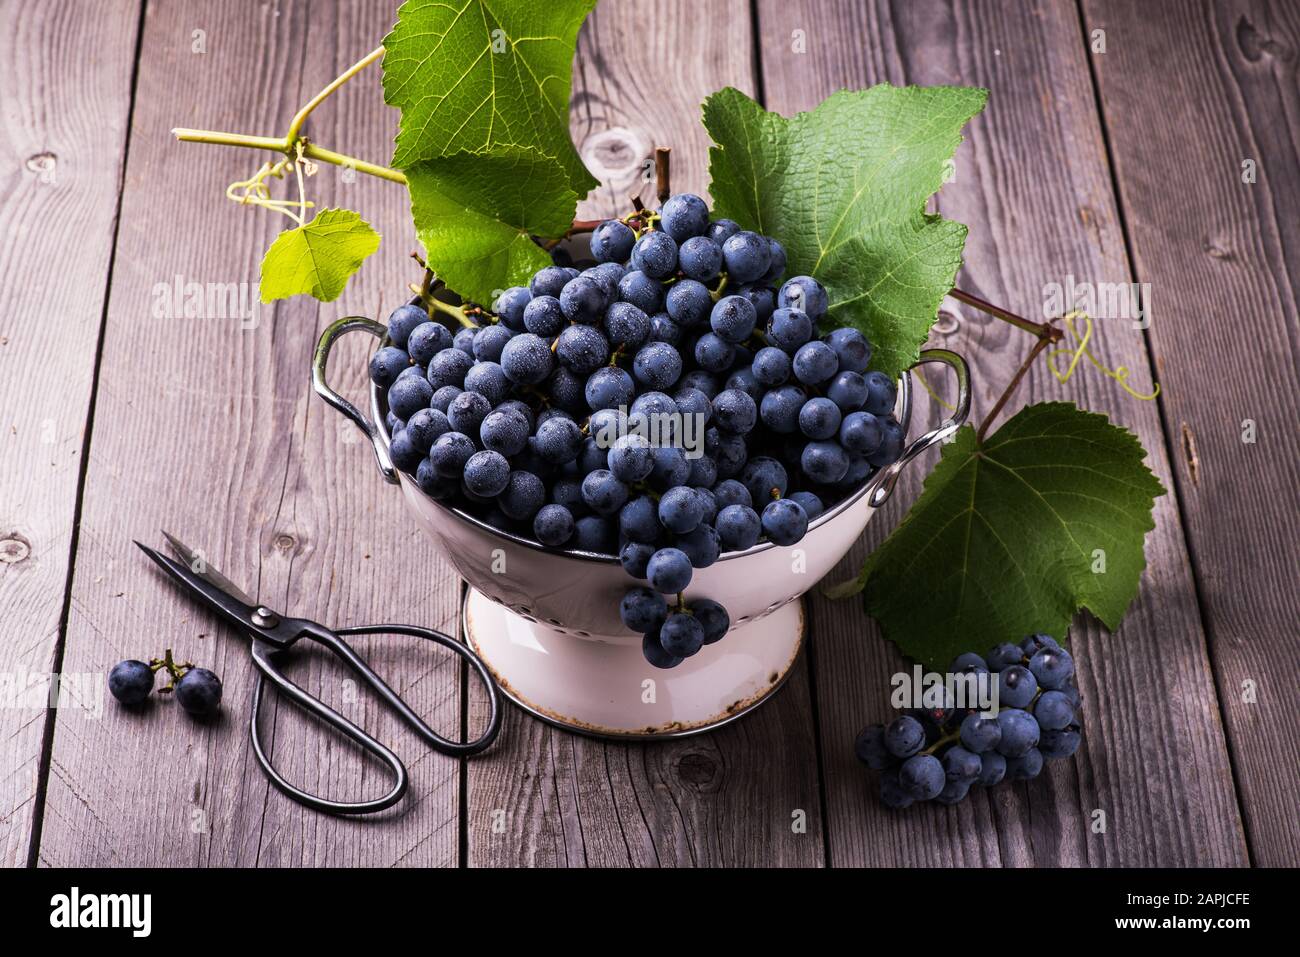 still life with black grapes in an old colander on rough wooden table Stock Photo